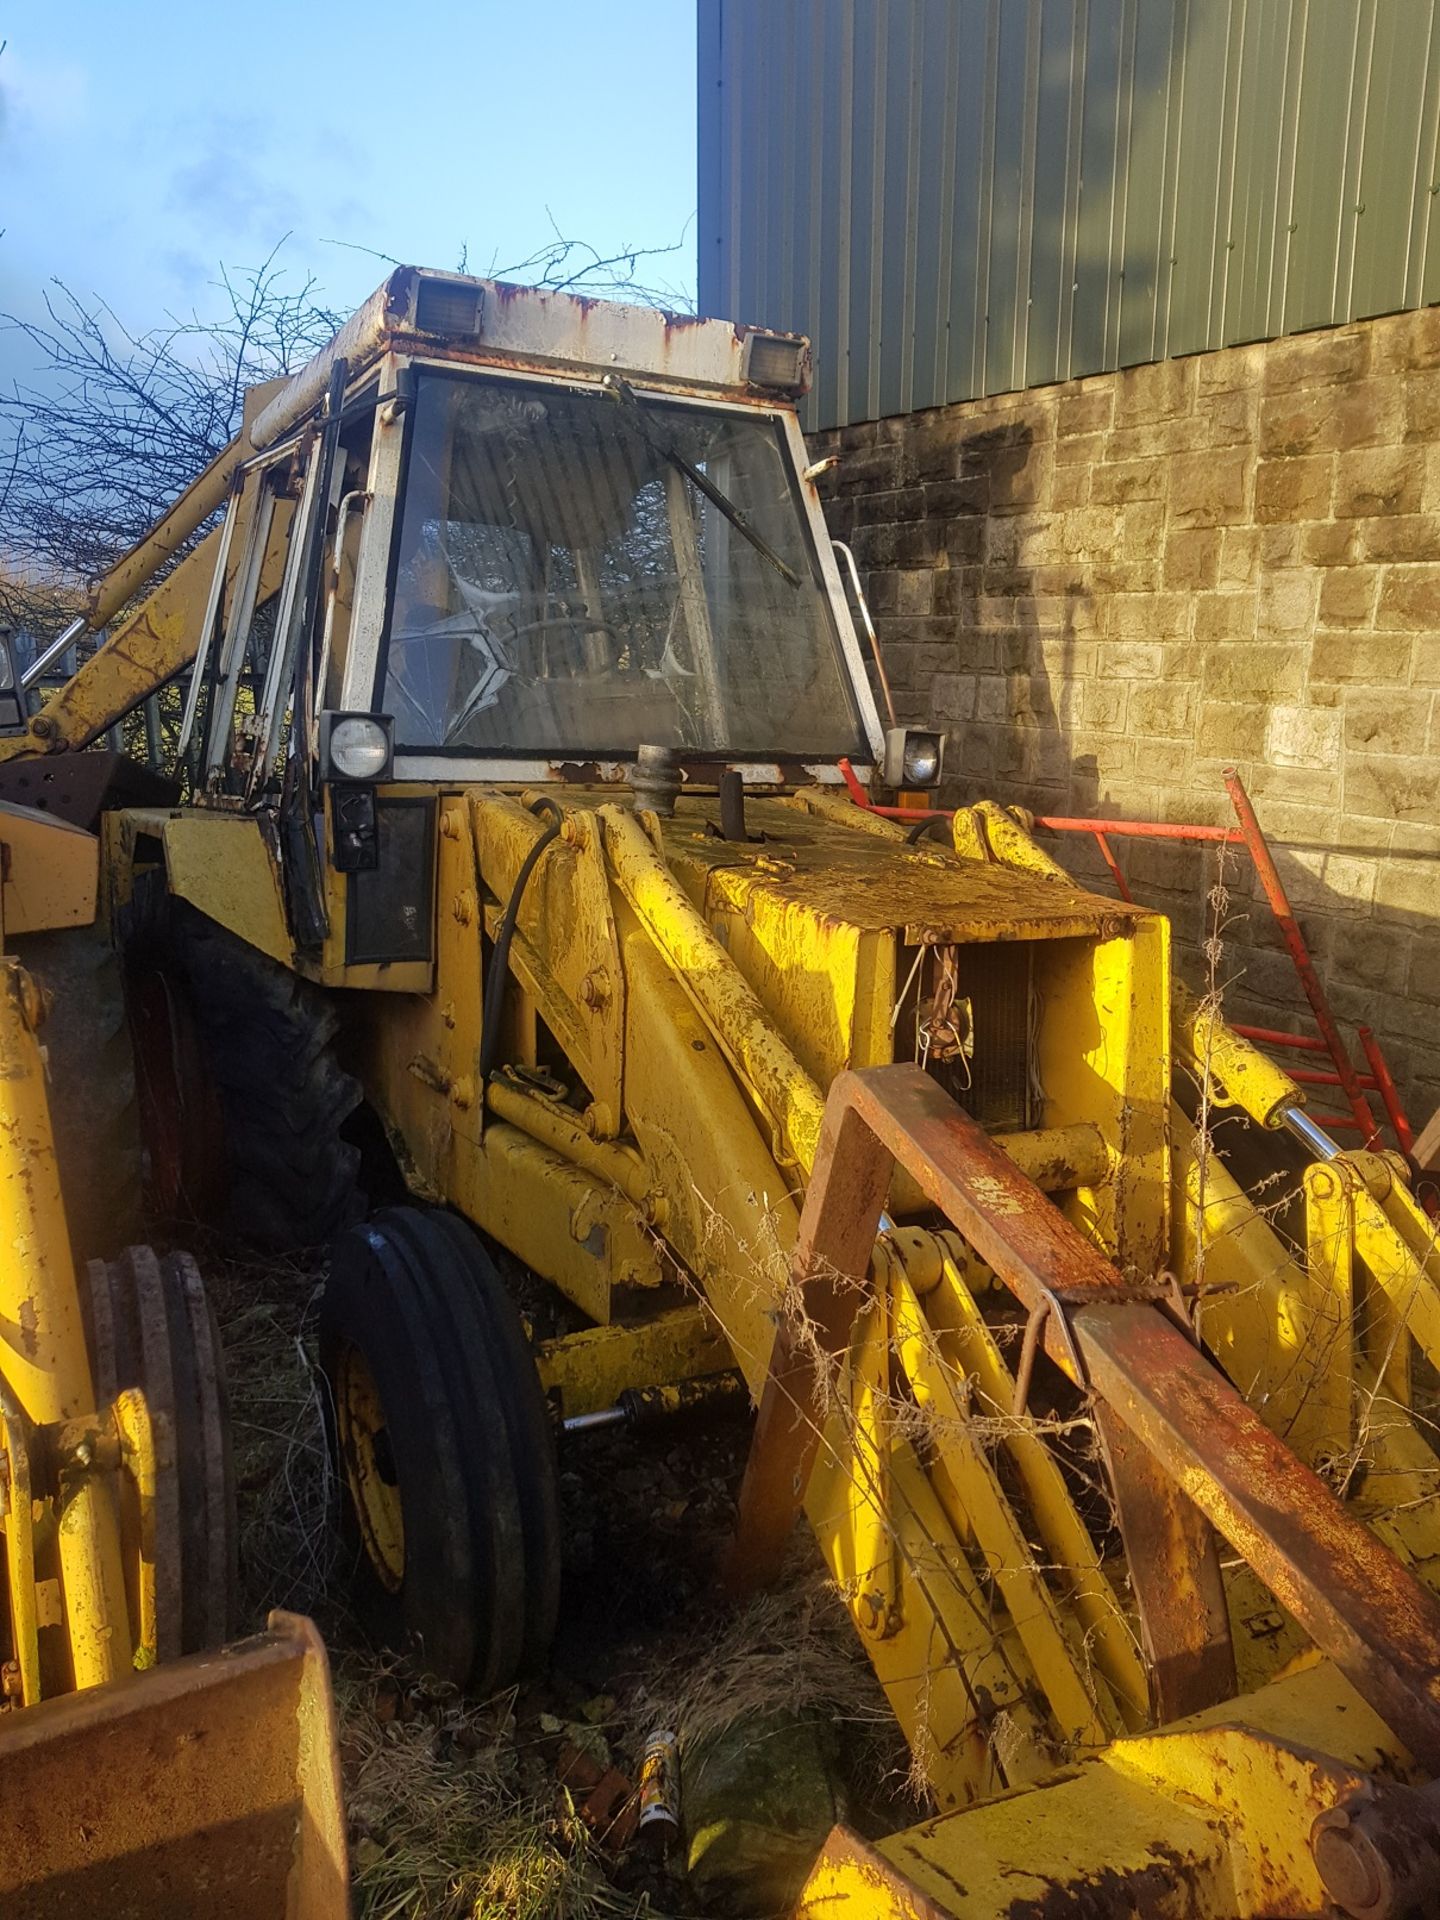 JCB 3CX EXCAVATOR WITH BUCKET / FORKS AND REAR BACK HOE / REAR ACTOR - SELLING AS SPARES / REPAIRS